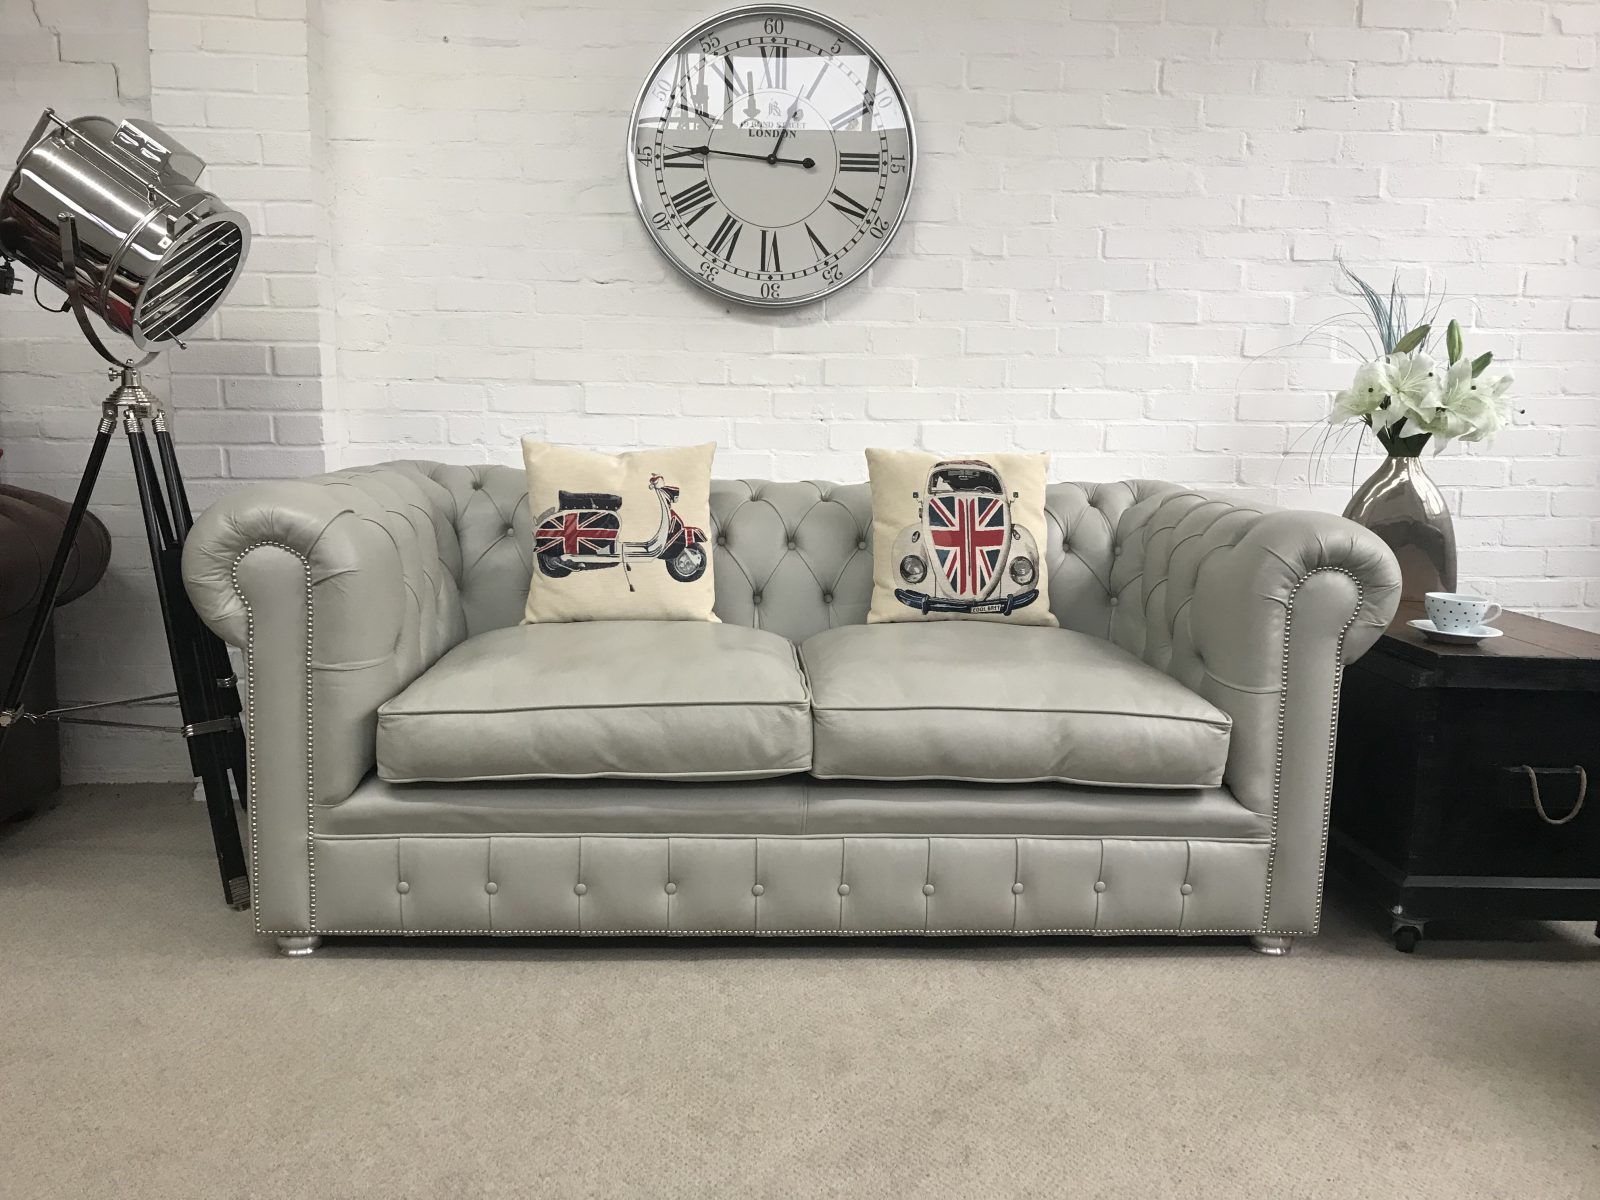 Stunning Quality 3 Seater Chesterfield Sofa.